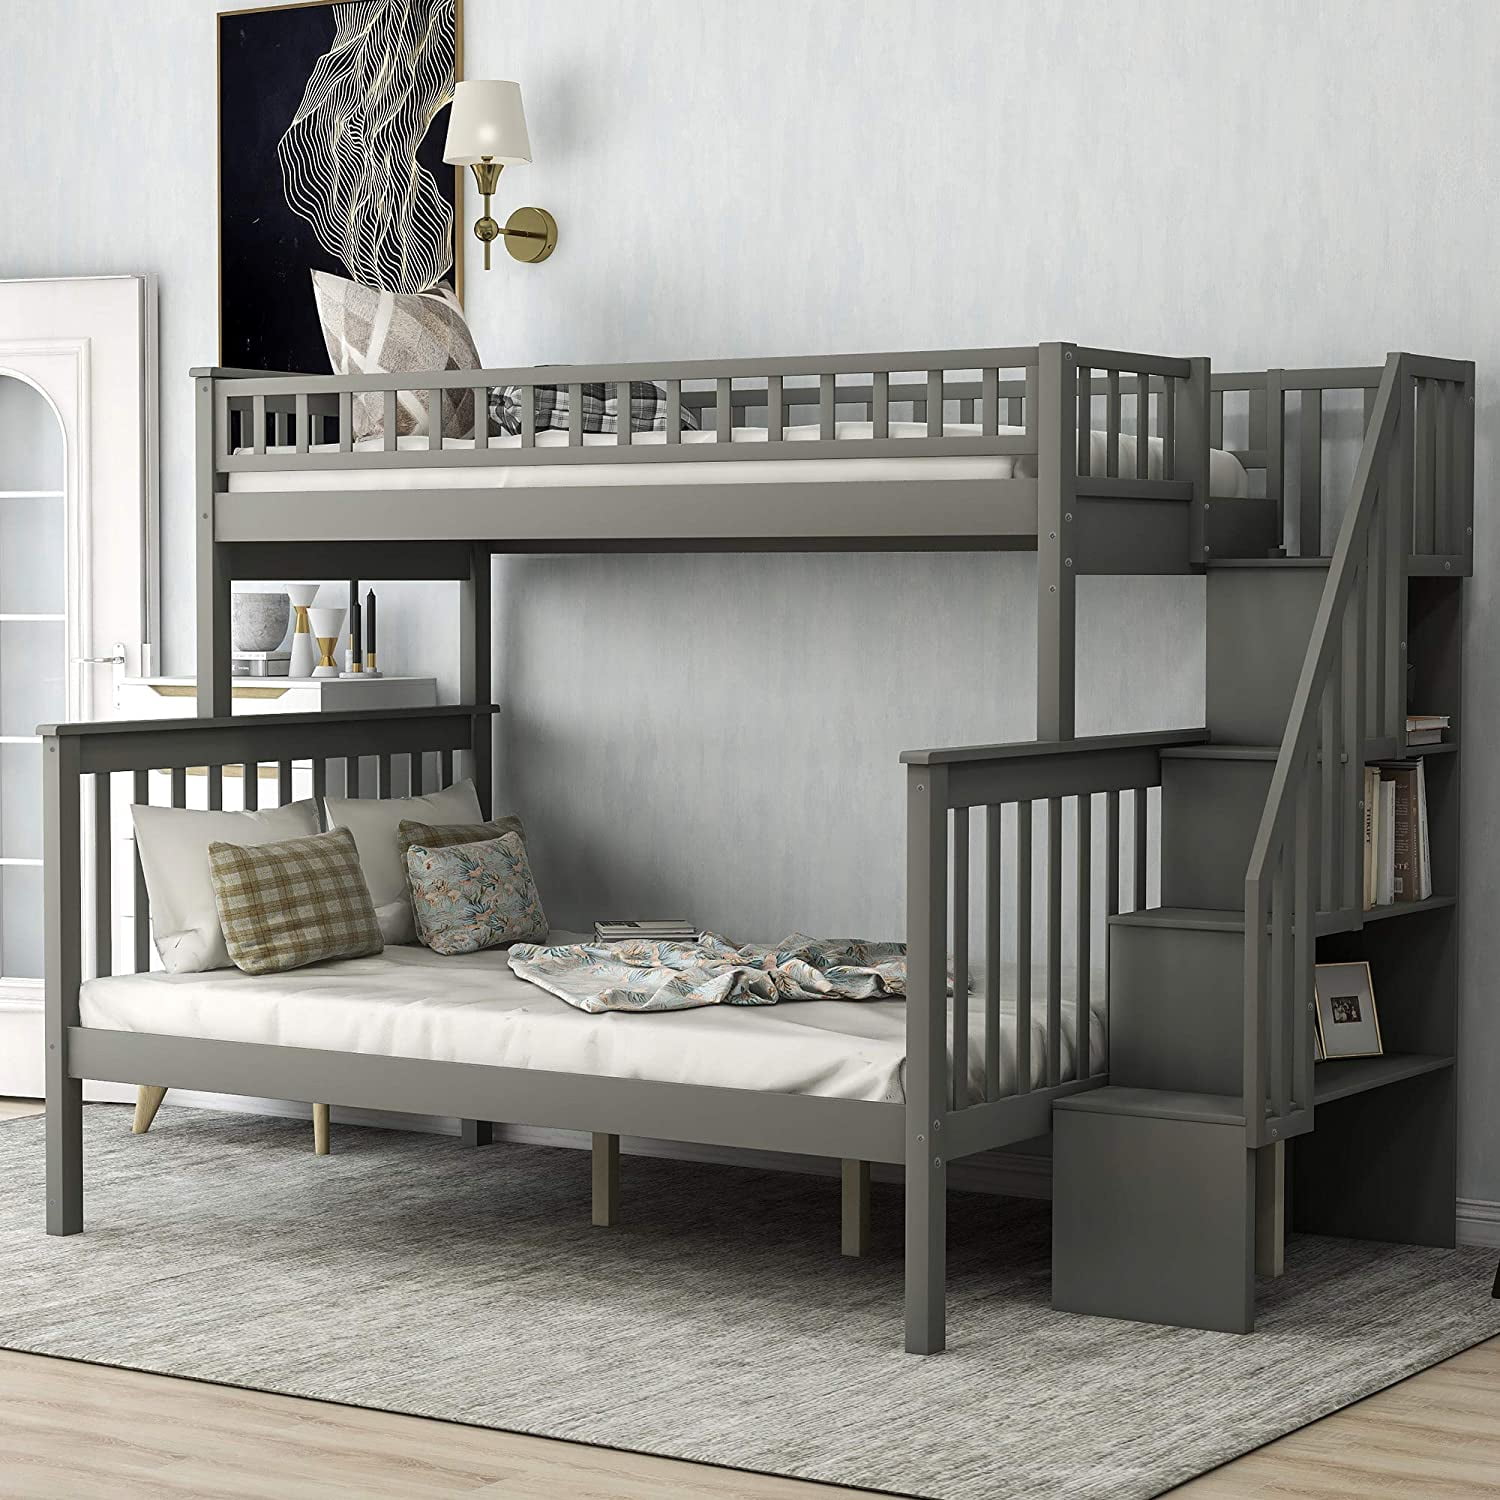 Modernluxe Twin Over Full Bunk Bed, Multiple Bunk Beds